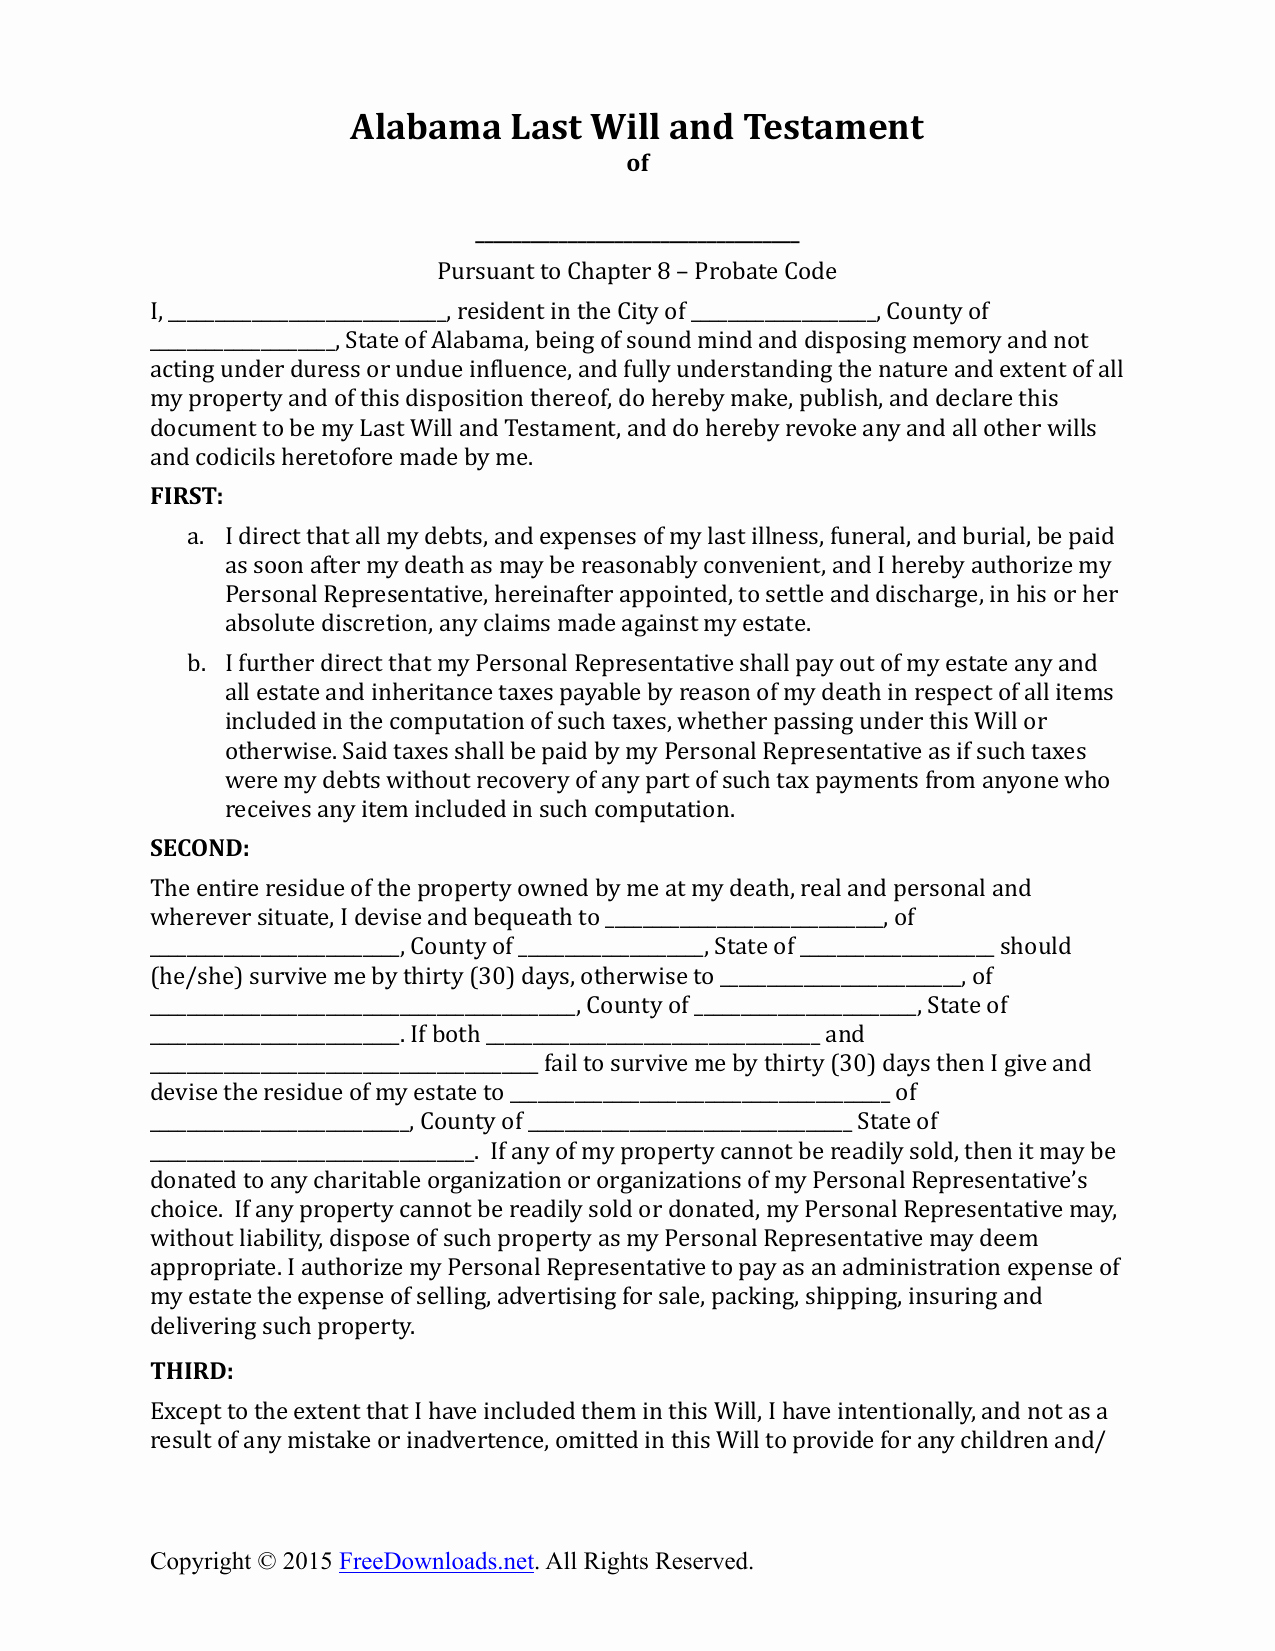 Living Will Template Pdf Fresh Download Alabama Last Will and Testament form Pdf